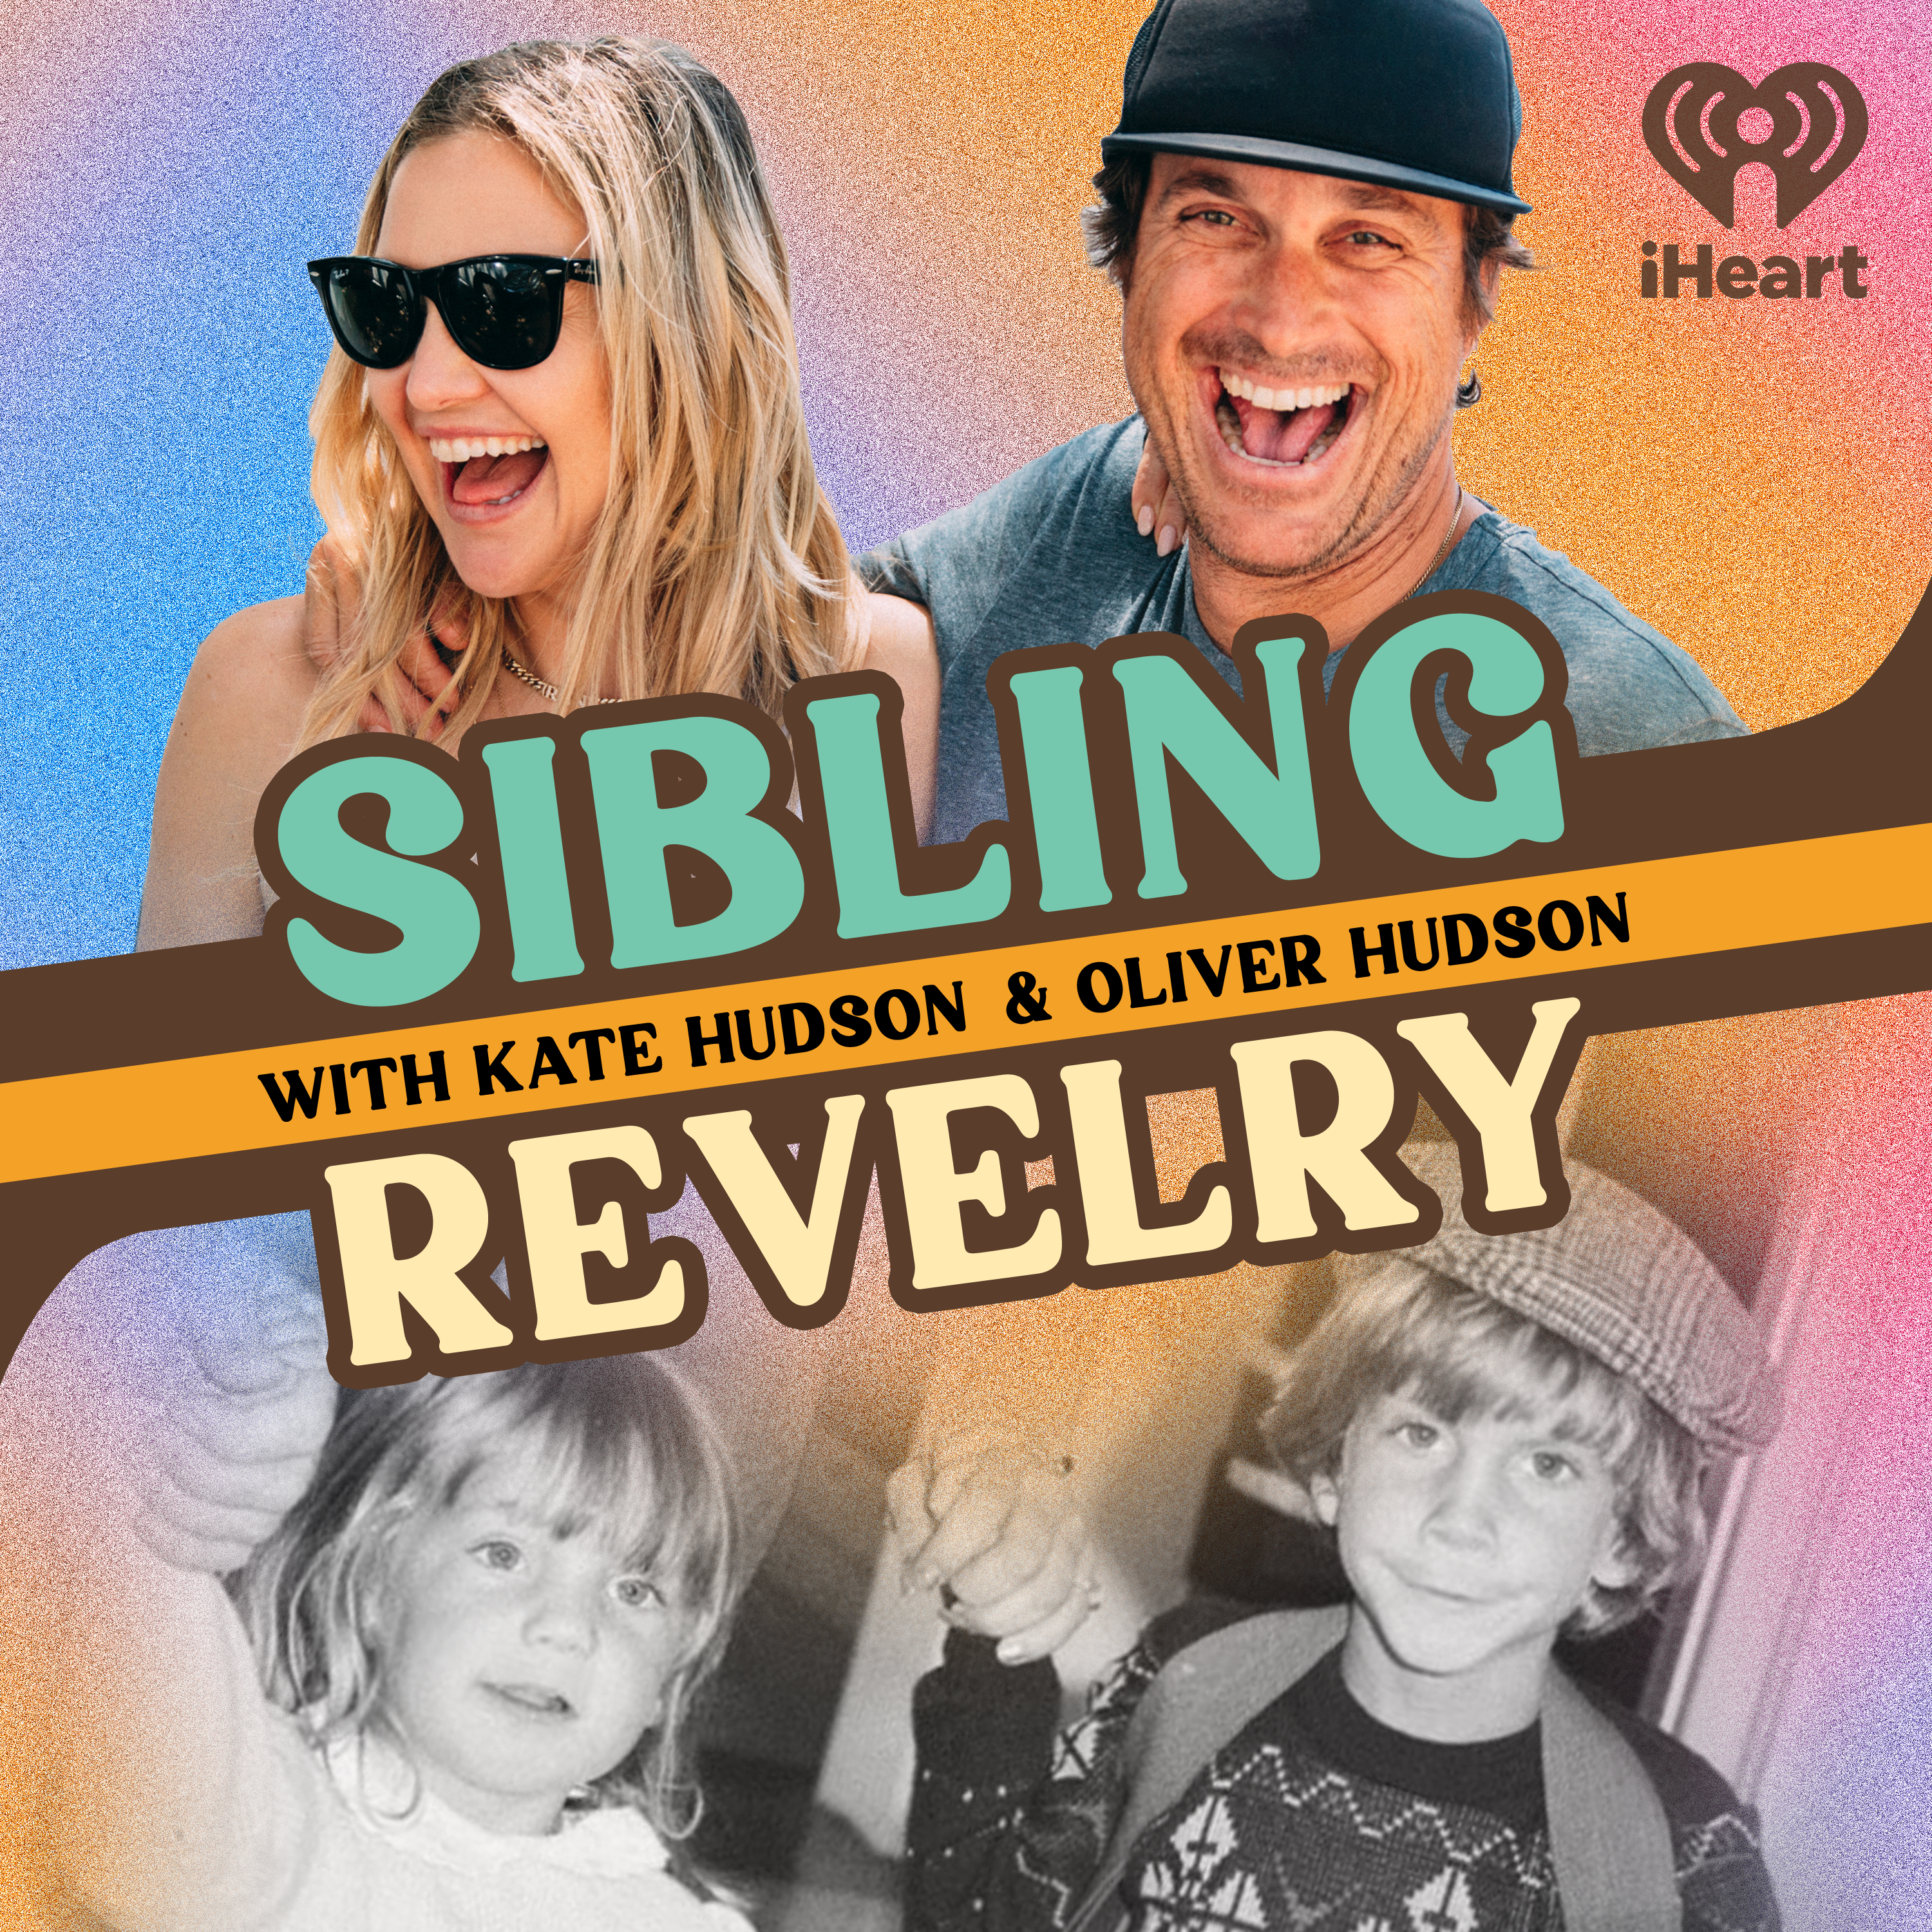 Welcome to "Sibling Revelry"